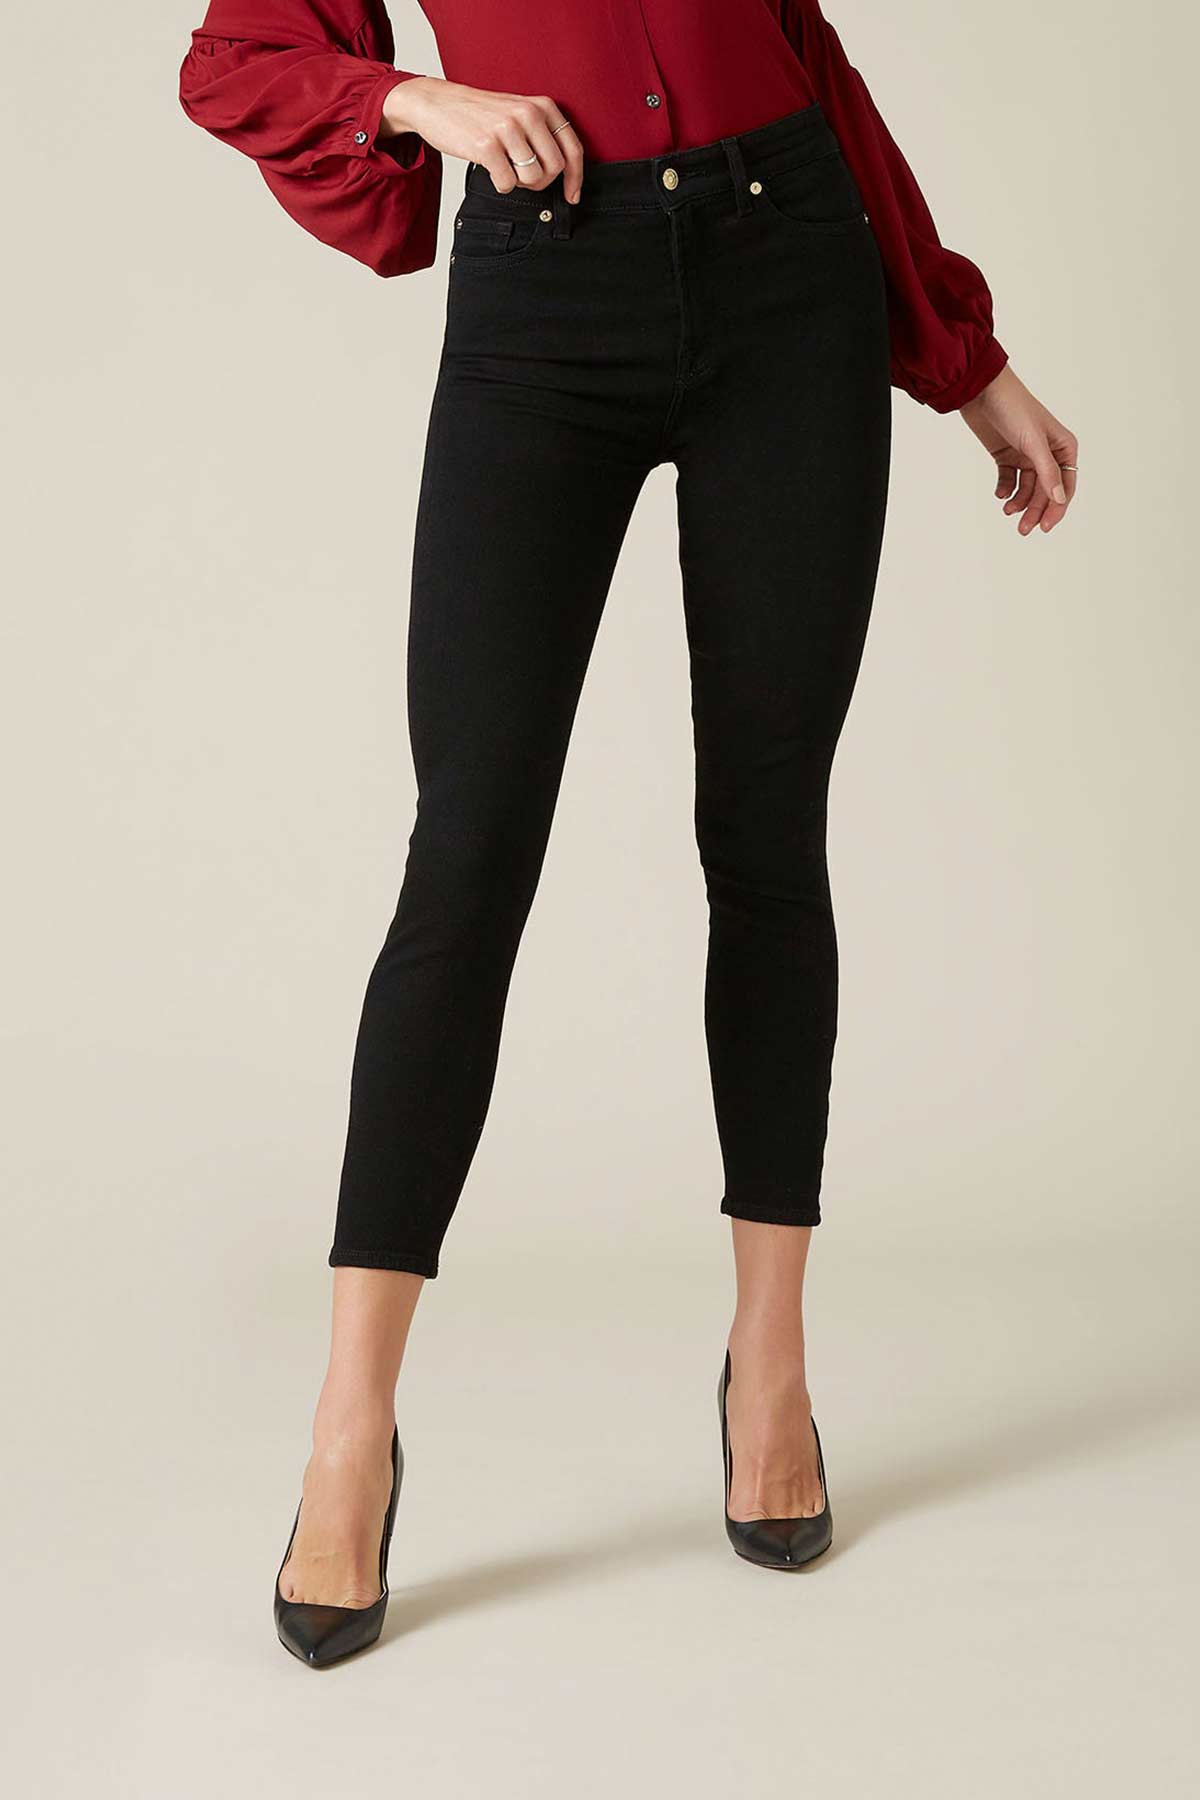 7 For All Mankind Aubrey Skinny Fit Jeans-Libas Trendy Fashion Store